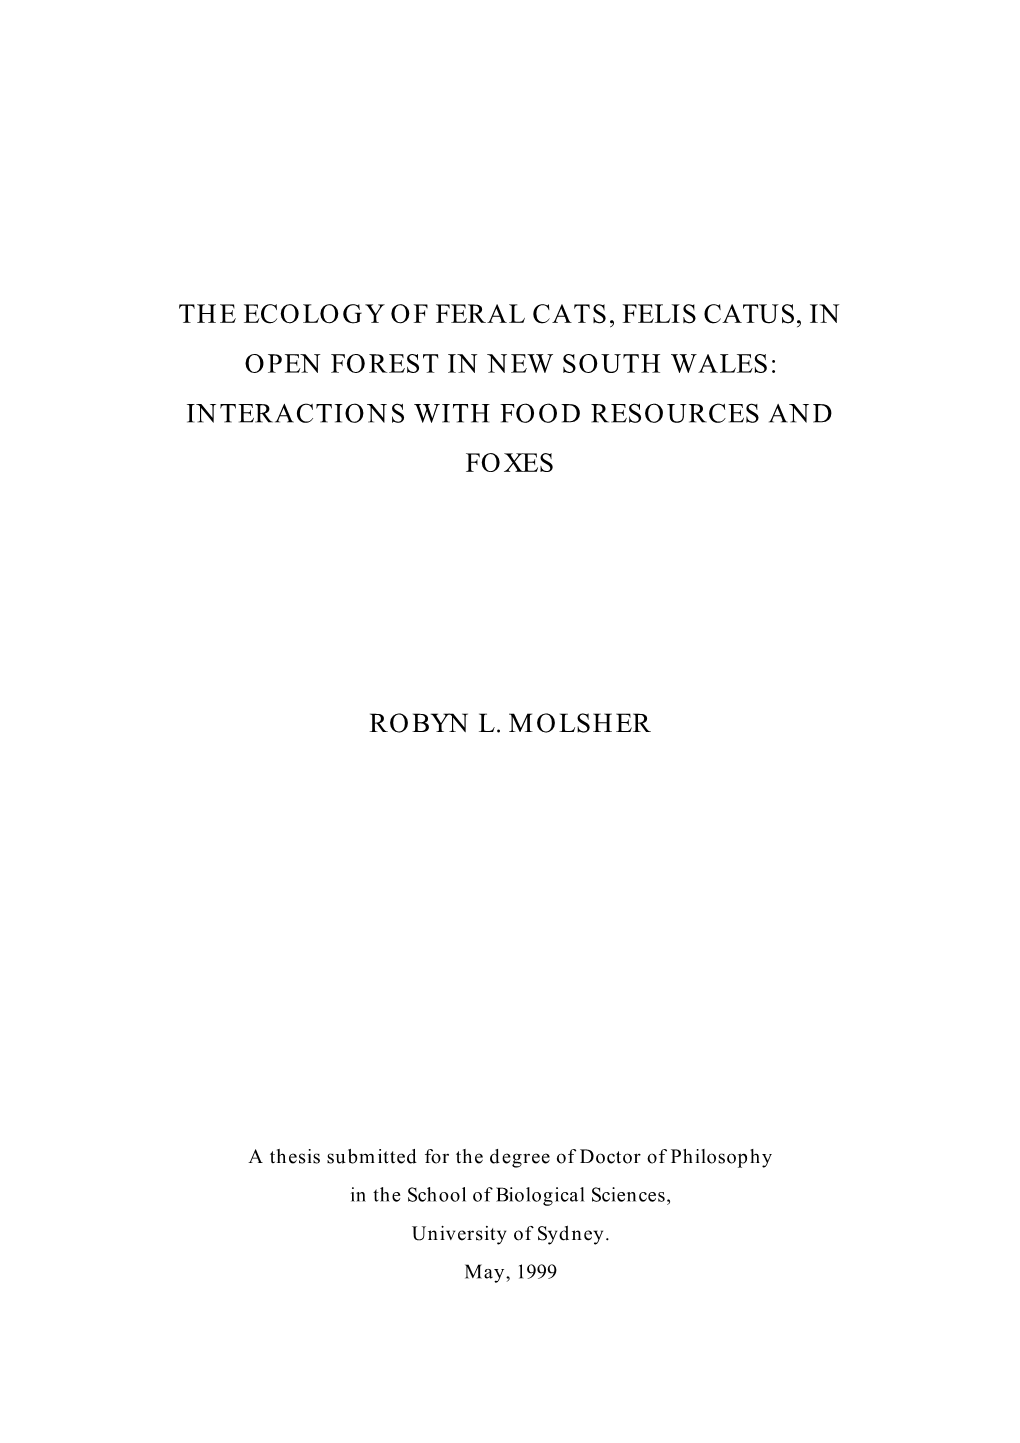 The Ecology of Feral Cats, Felis Catus, in Open Forest in New South Wales: Interactions with Food Resources and Foxes